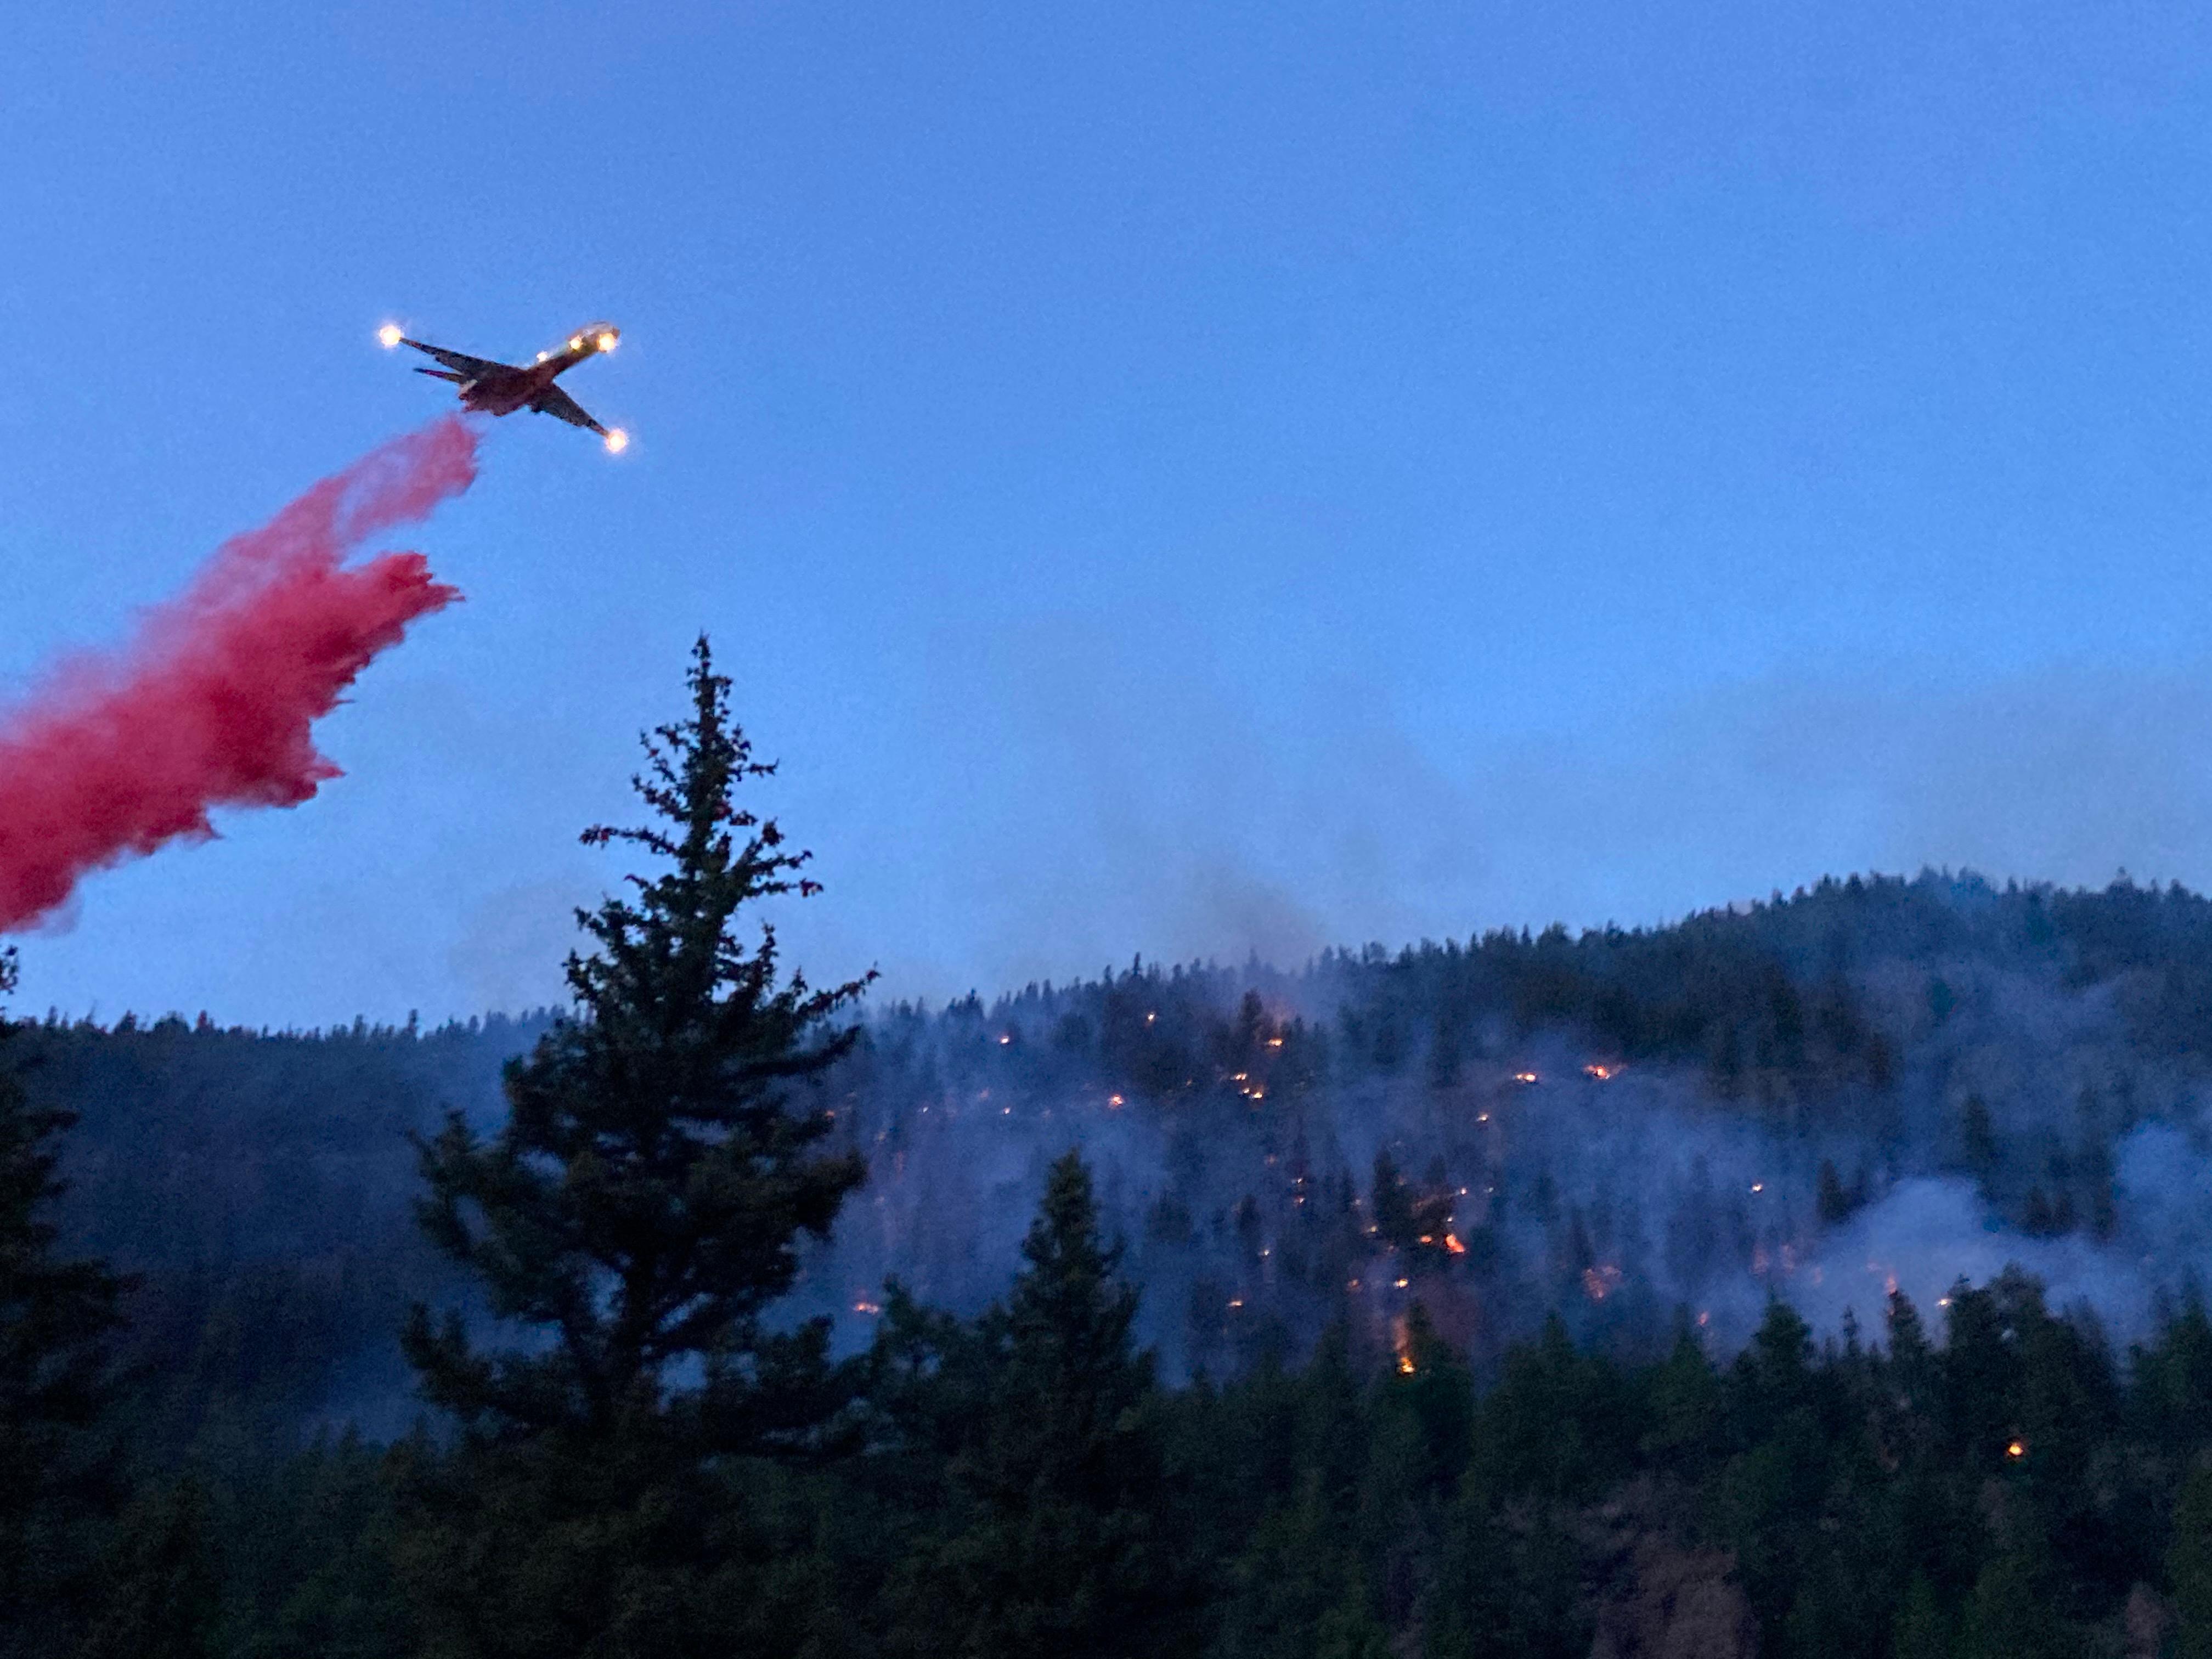 A large airtanker with headlights on drops red fire retardant out over a forest that is speckled with spot fires in the forest.